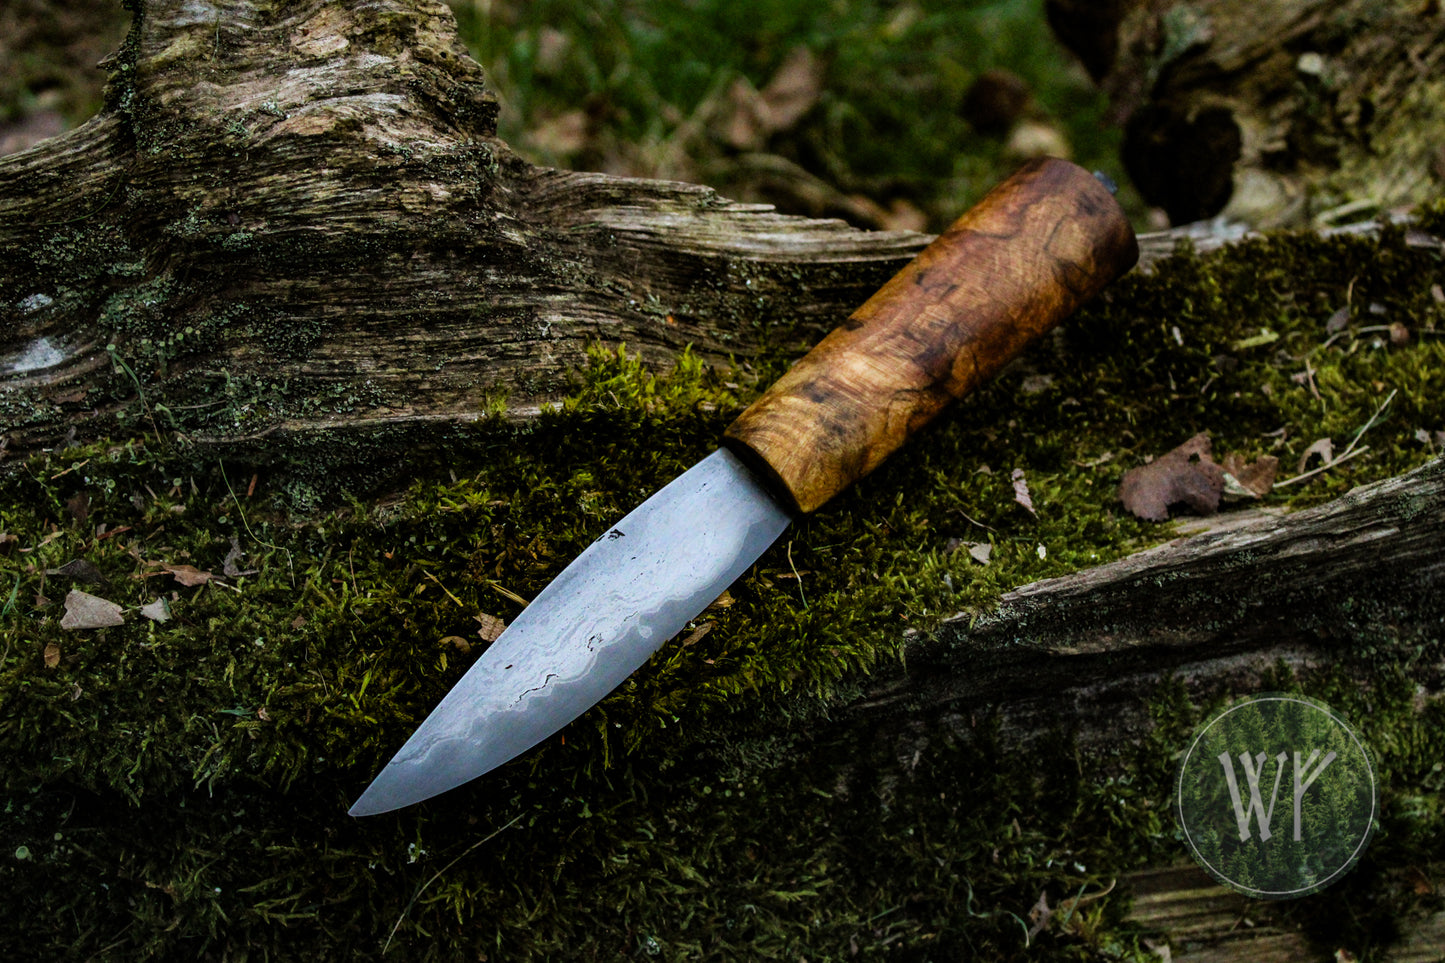 [RESERVED FOR NORTHERN TEXTILES] Reproduction of Trollsteinhøe Reindeer Hunter Knife / Iron Age Scandinavian Knife / Spalted Birch Burr Handle / Laminated wrought iron & steel blade